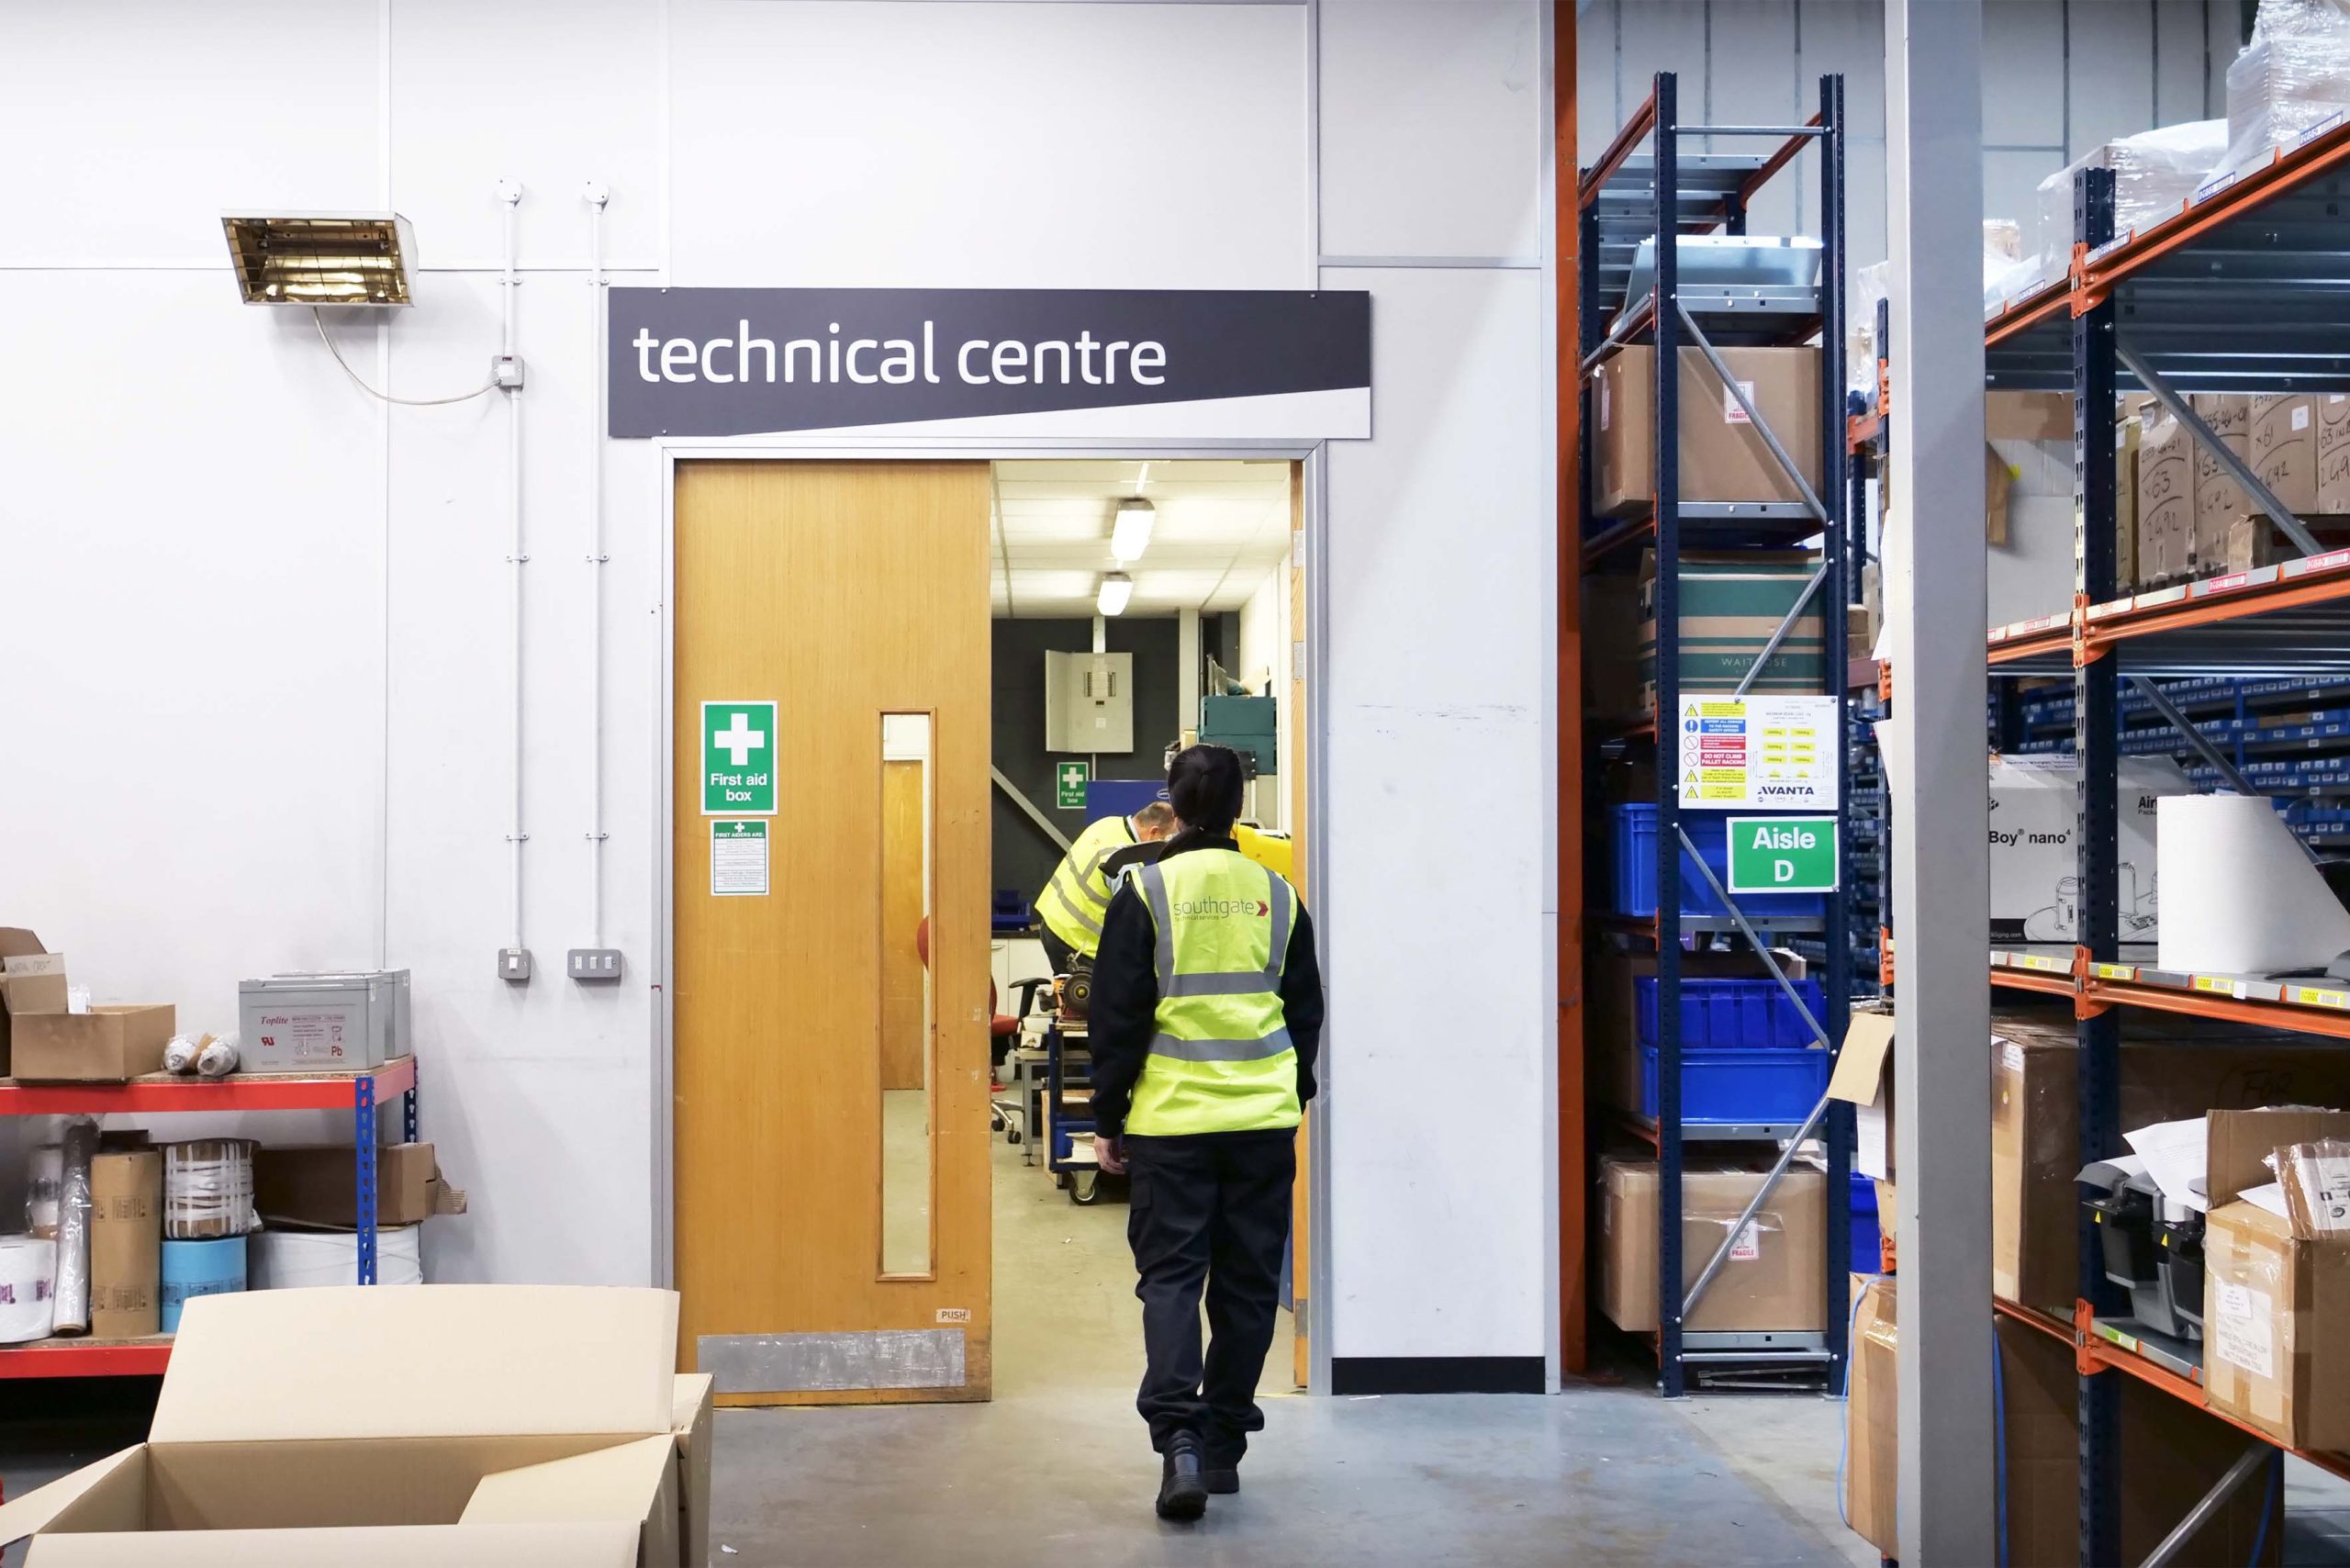 Find out more about our Southgate Technical Services offer